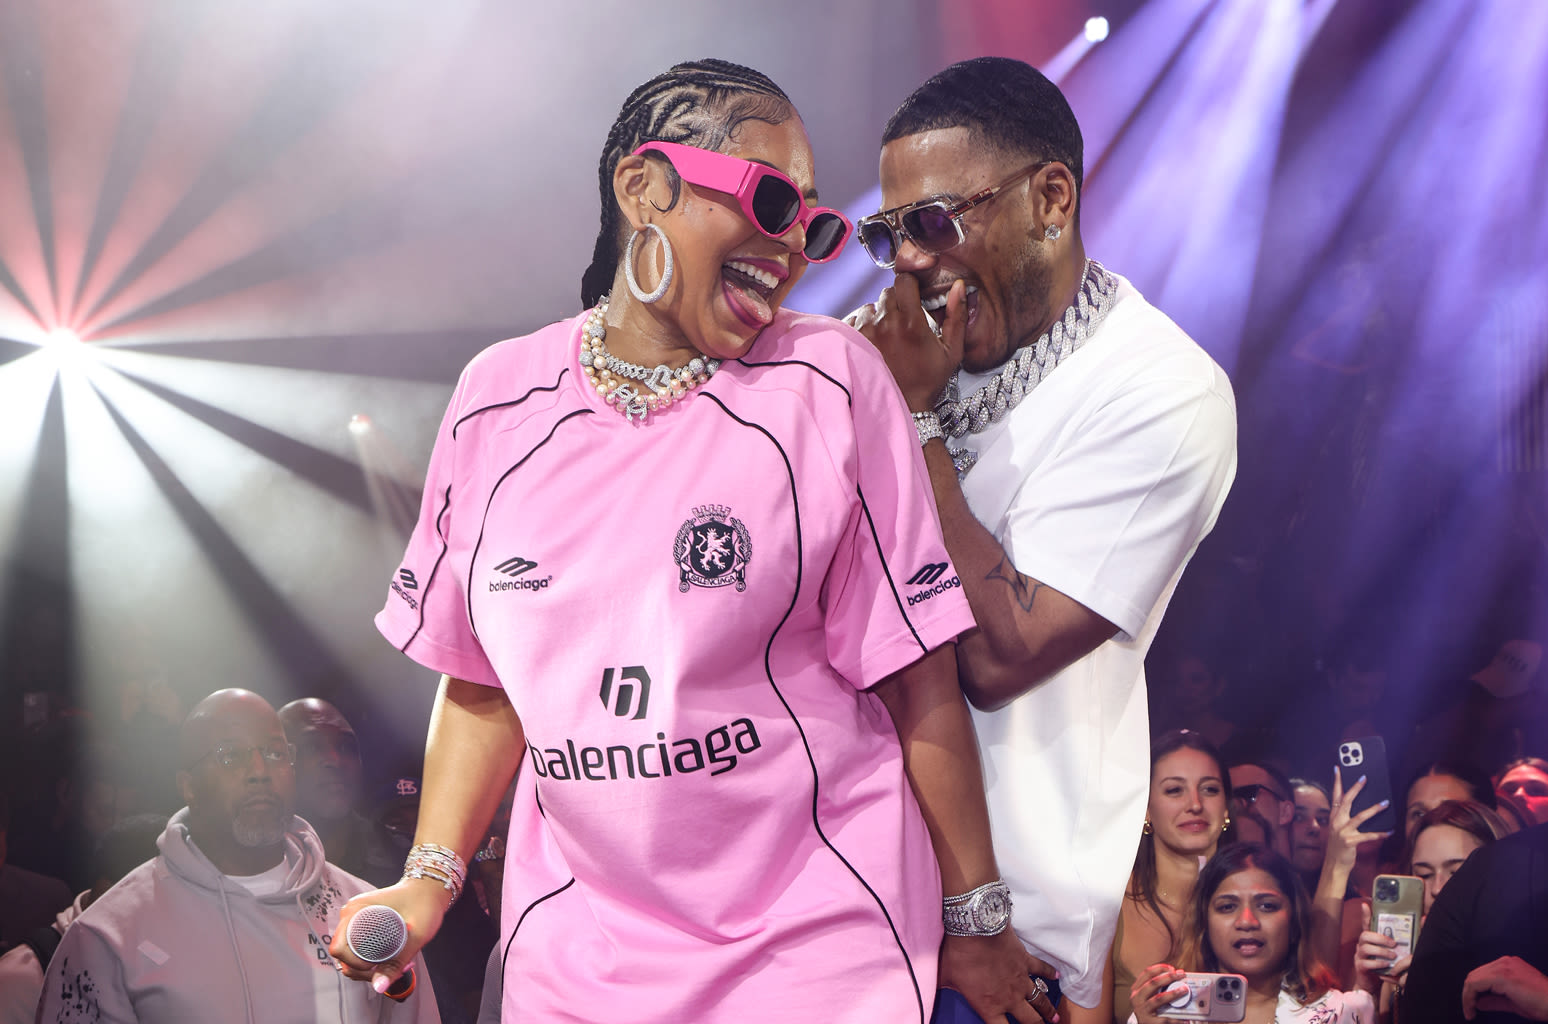 Ashanti Reveals How Nelly Proposed to Her: ‘The Way It Happened Was Just so Funny’